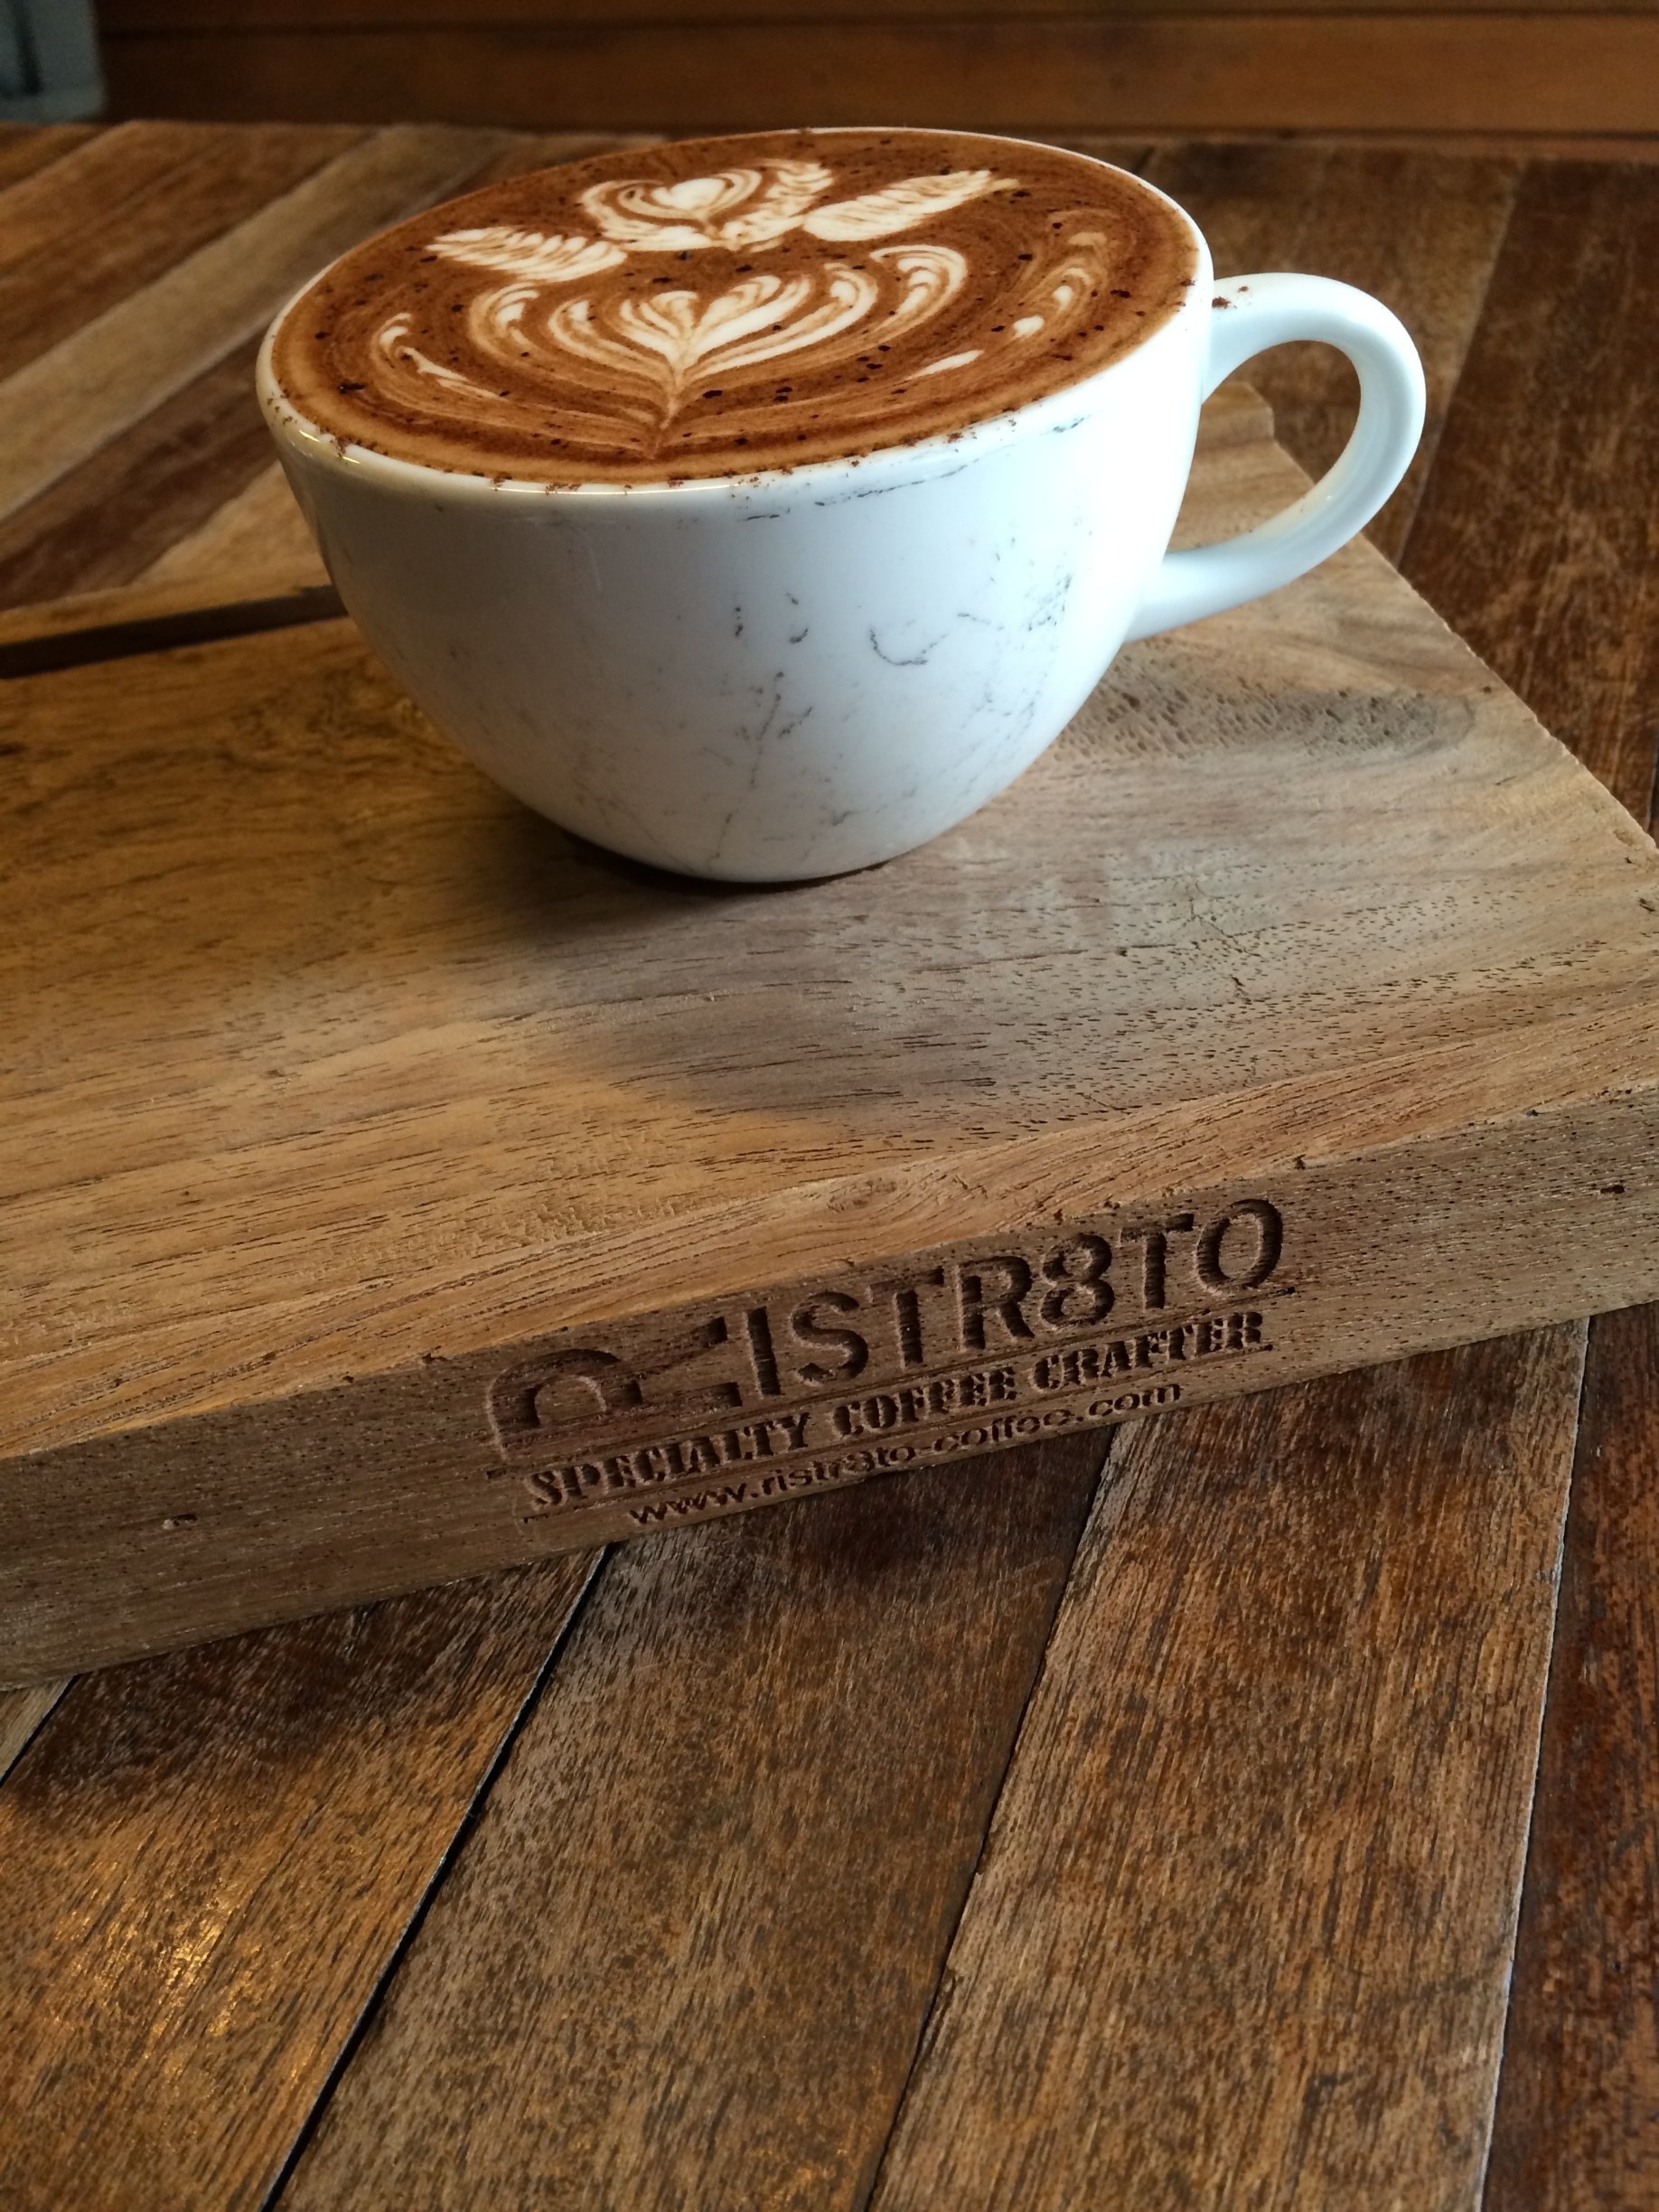 Ristr8to Coffee in Chiang Mai, Thailand not only tastes great, but looks great too! Their award winning latte art will make you want to snap a pic for sipping the delicious brew. Located in charming the Nimmanhemin neighborhood, there's plenty of things to see and do all around this cute little coffee shop. 